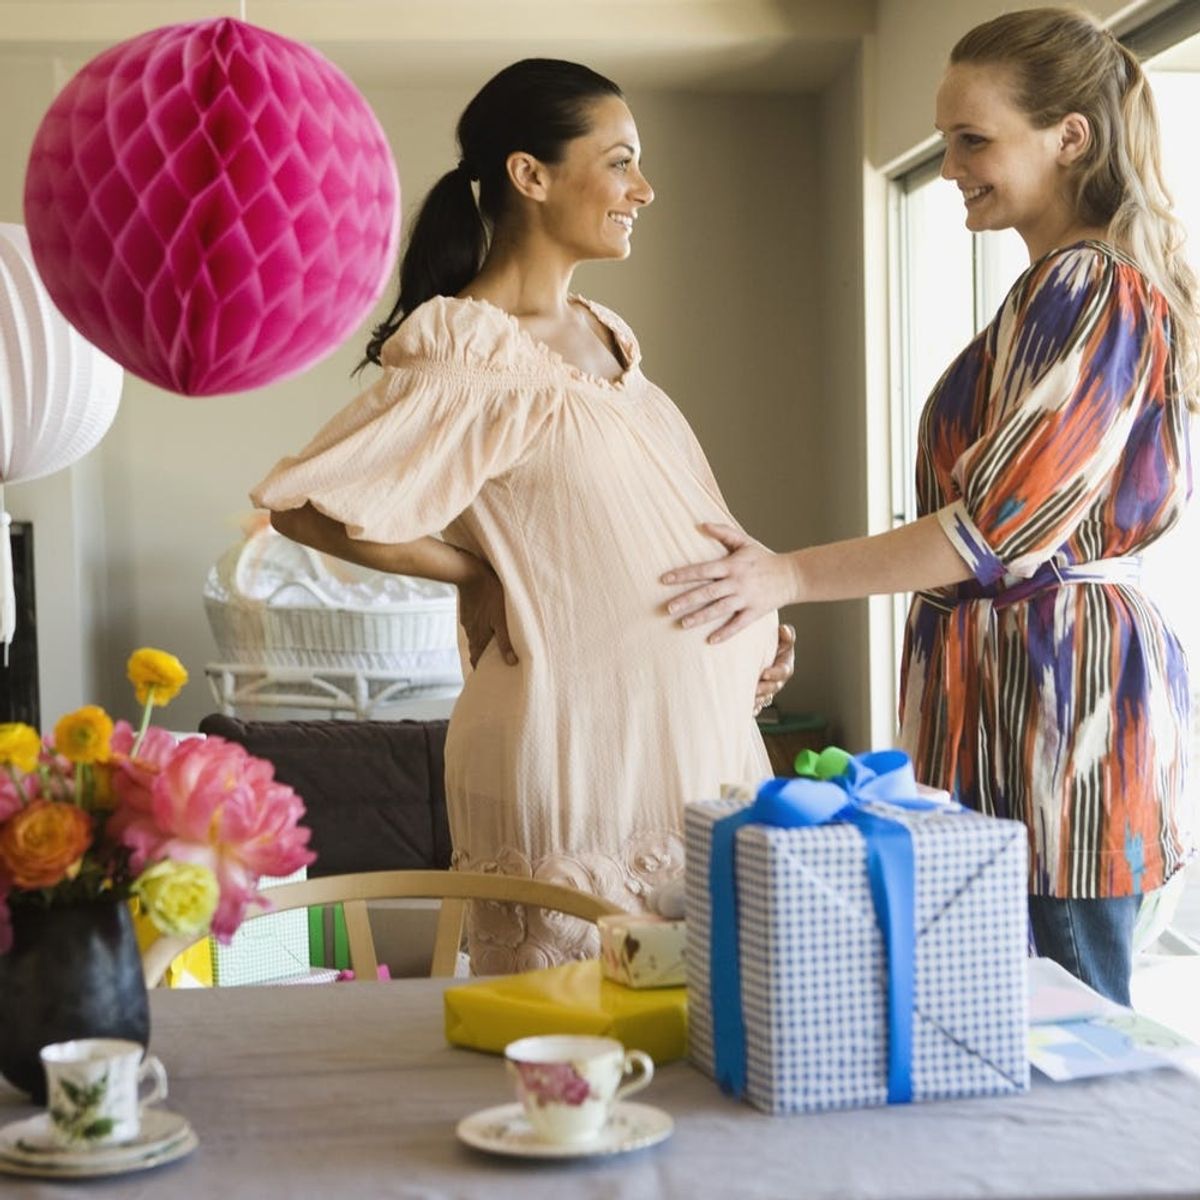 What to Consider Before Doing a Baby Gender Reveal